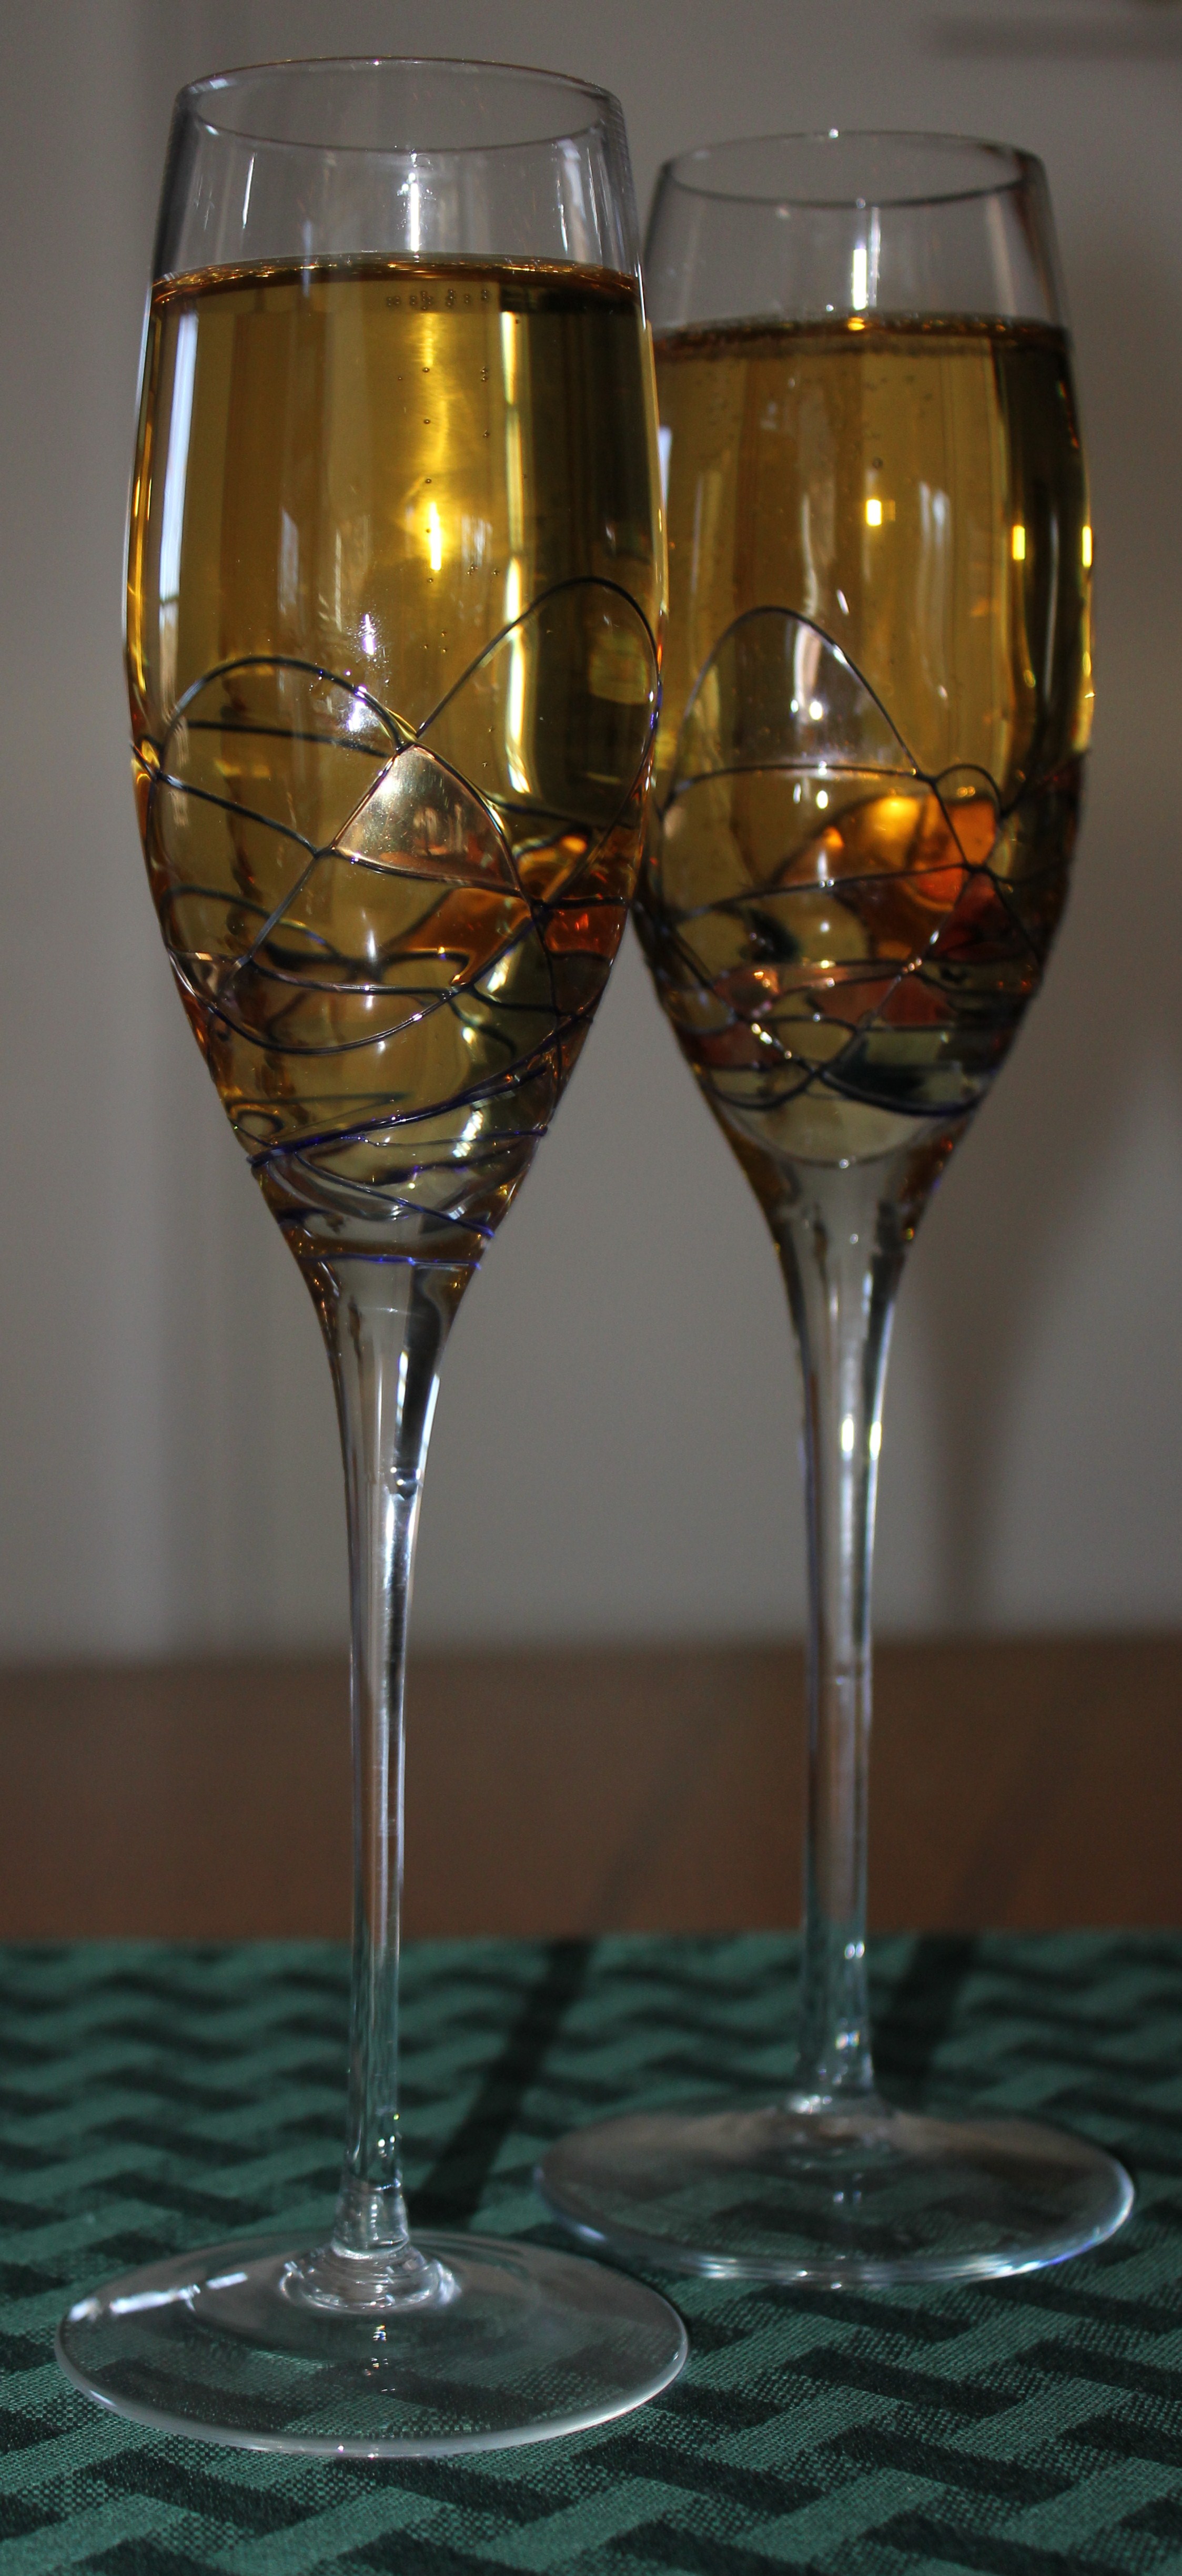 Drink of the Month, December 2011: Bubbly, of Course! | Kel's Cafe ...